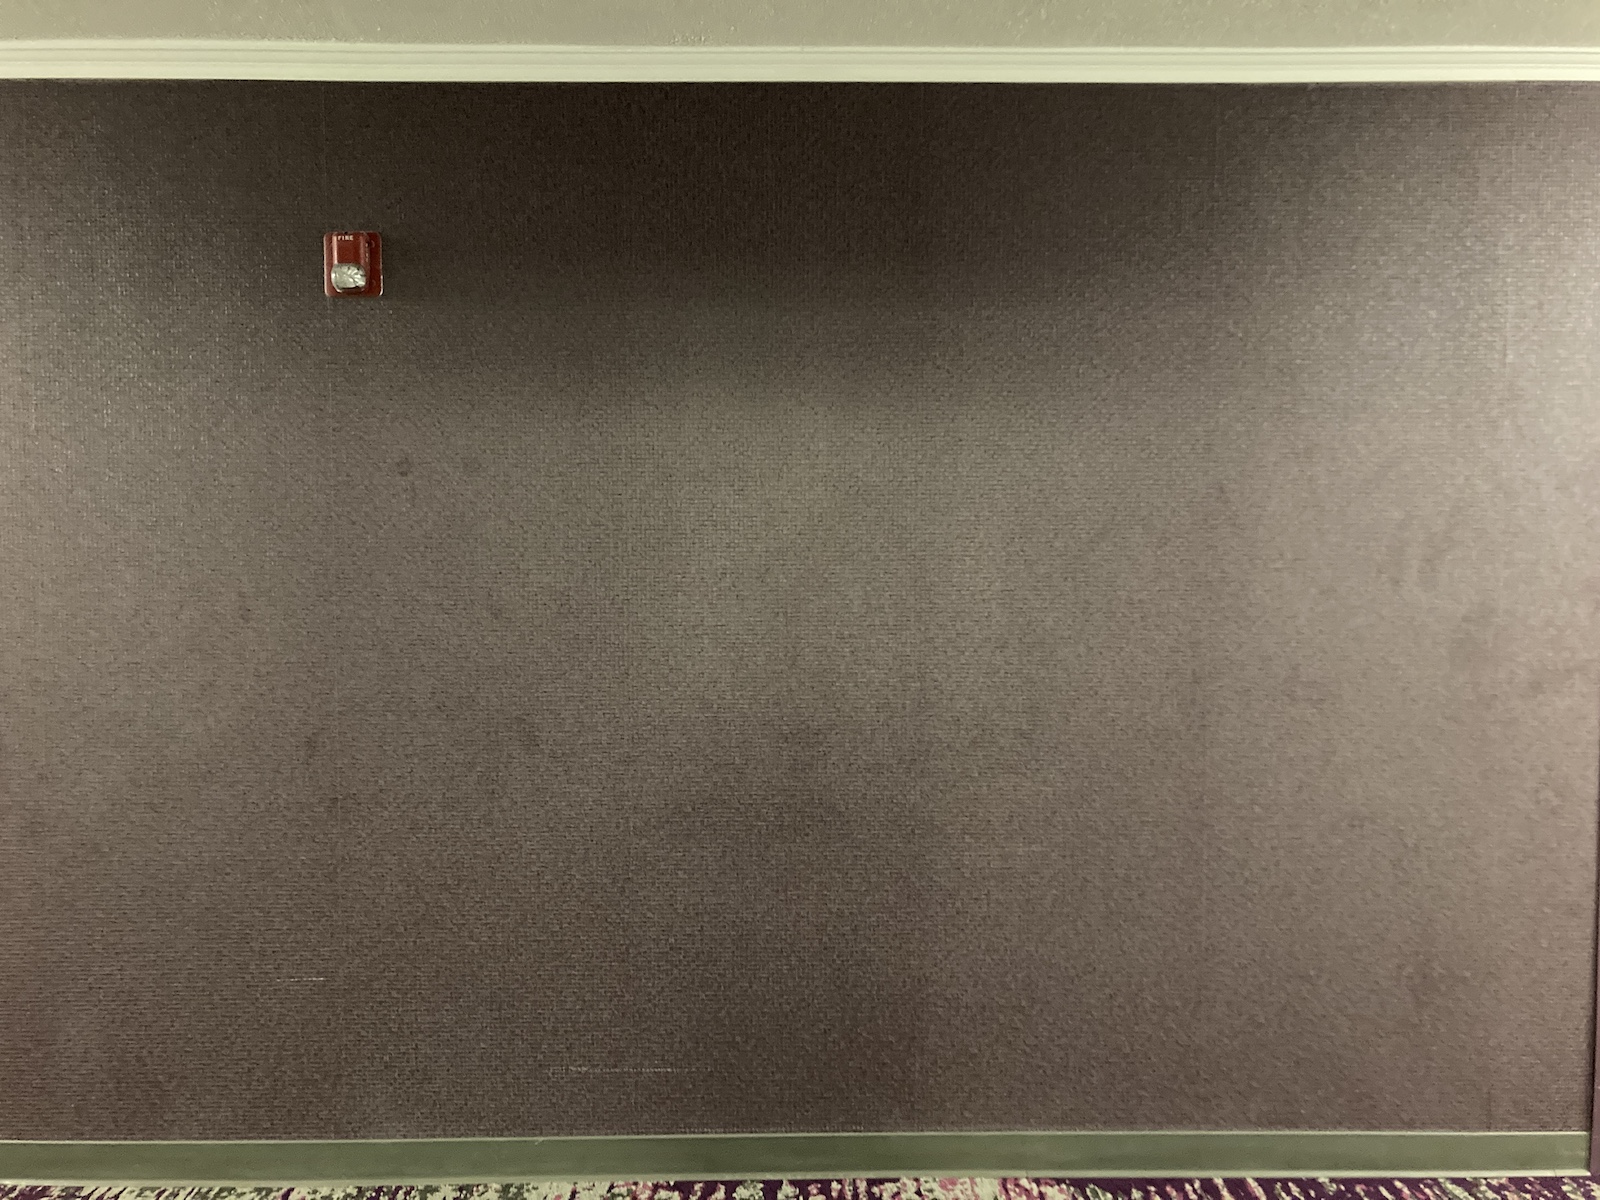 Image of a blank wall with no signage